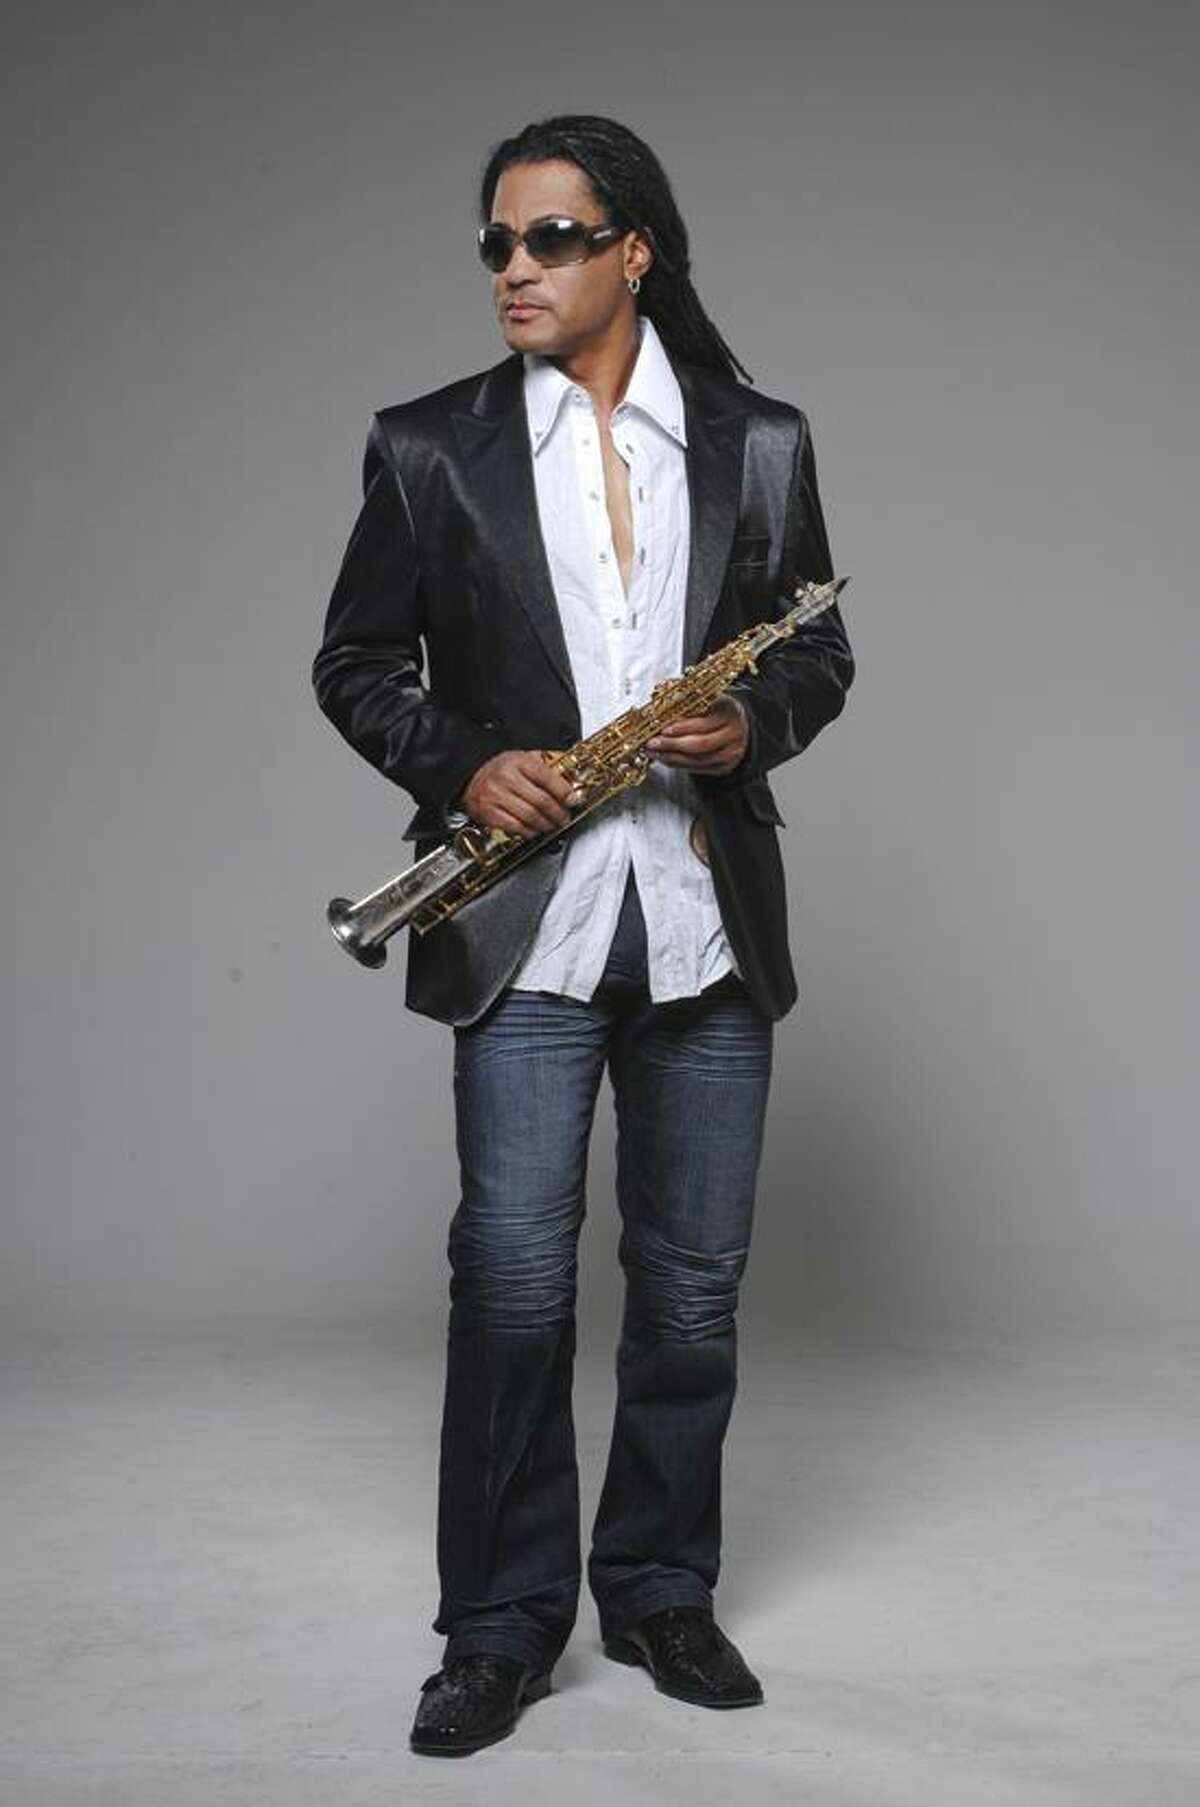 Contributed photo: Connecticut-raised smooth jazz tenor sax player Marion Meadows will return home for his 20th annual Jazz Christmas Show Saturday night at Toad's Place, 300 York St., New Haven. The show begins at 9 p.m., with doors opening at 8. Tickets are $20 in advance or $25 at the door. They are available at www.toadsplace.com or by calling 203-624-8623.